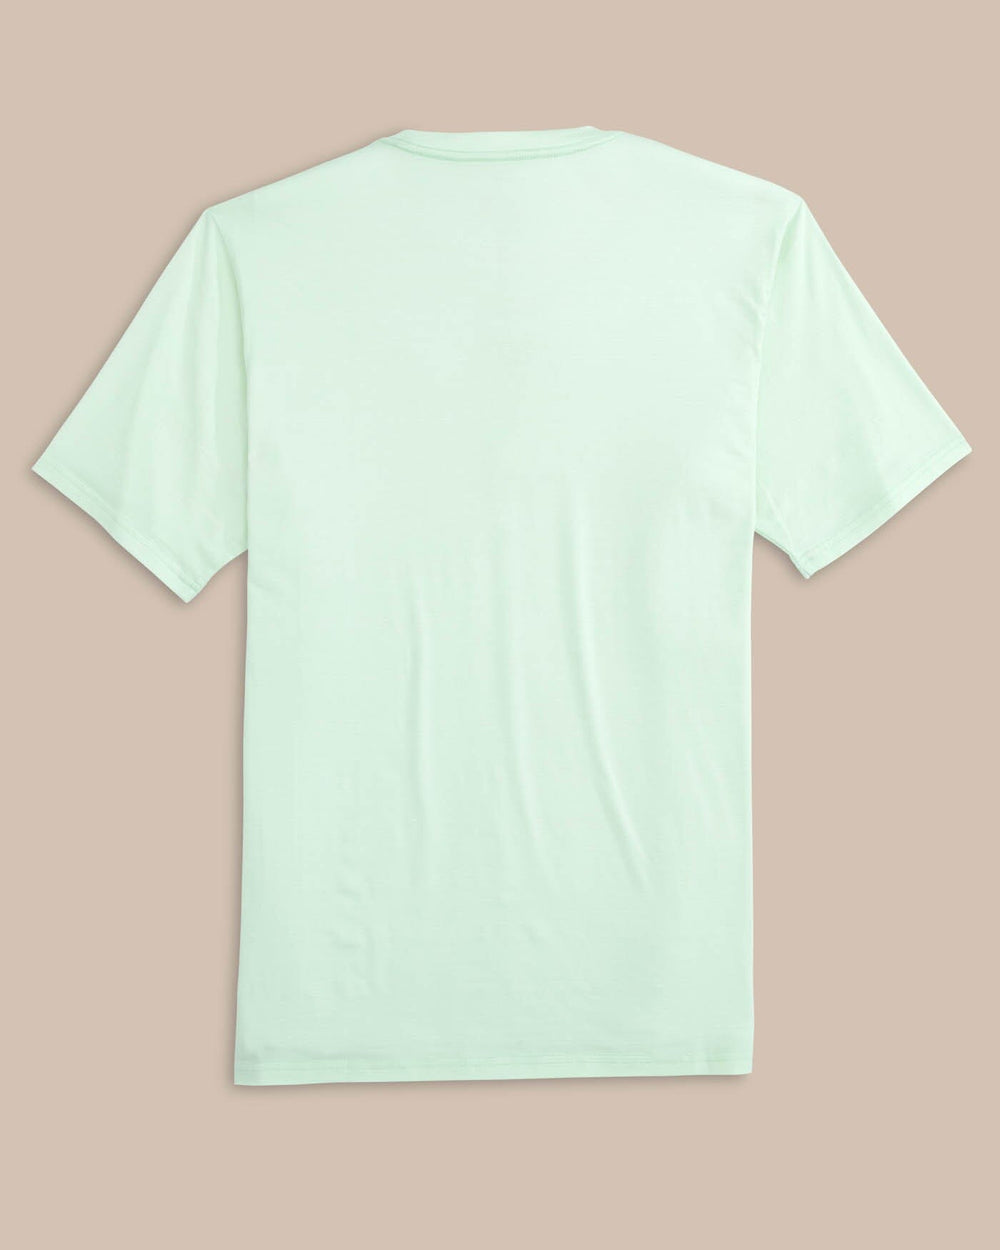 The back view of the Southern Tide The Seaport Davenport Stripe Tee by Southern Tide - Morning Mist Sage